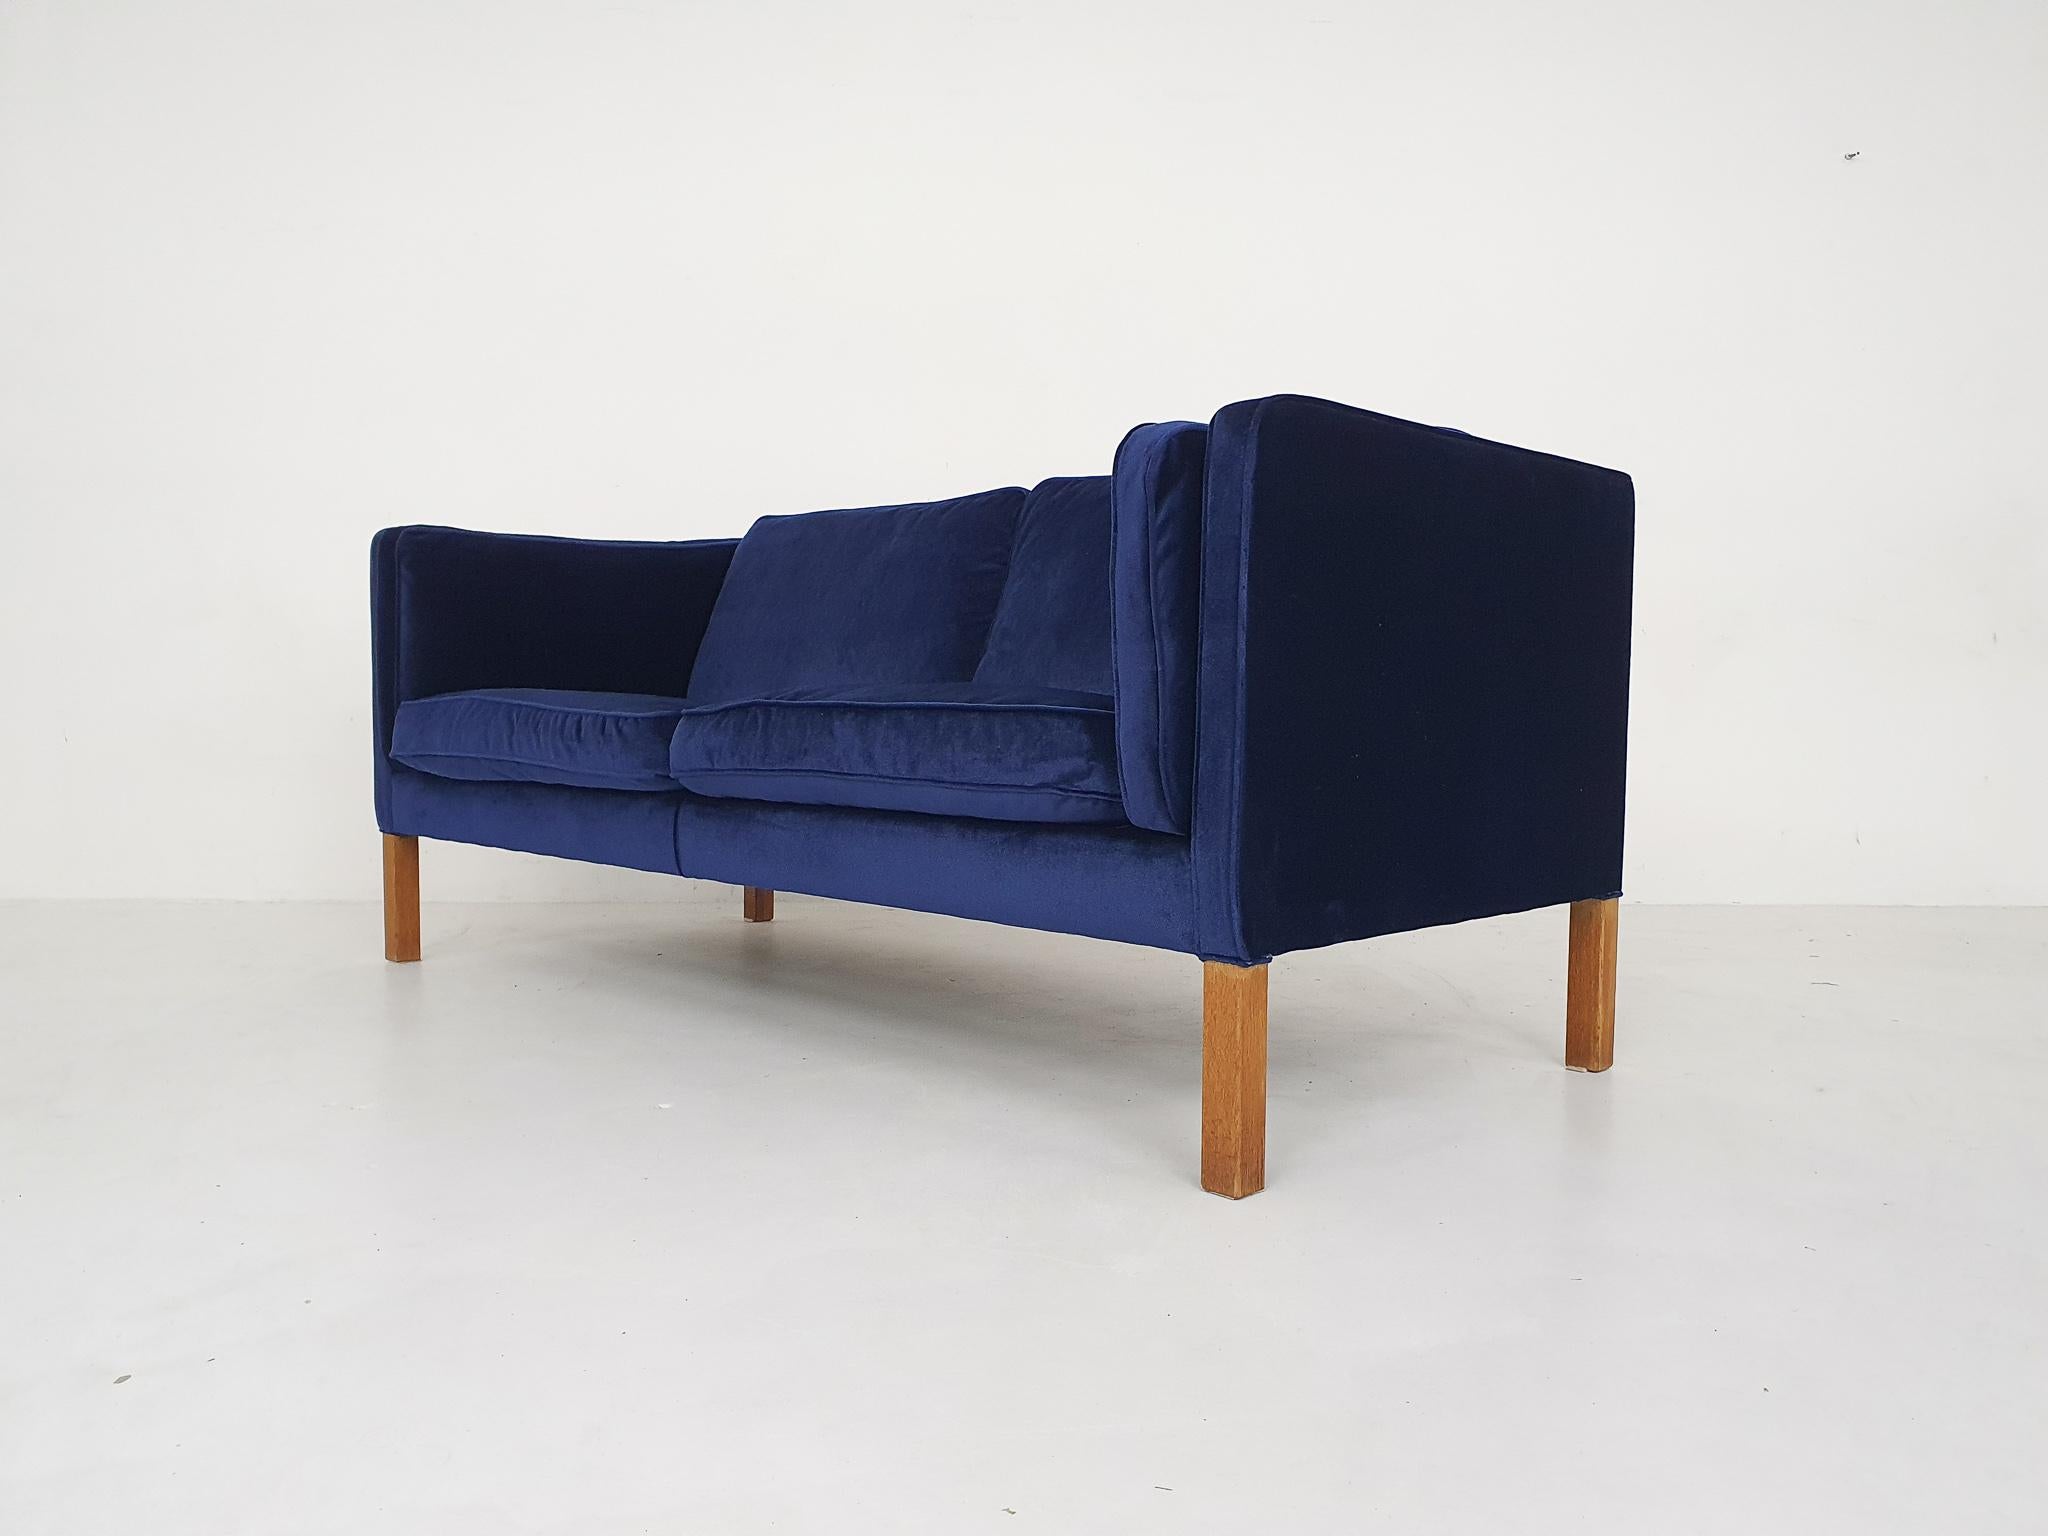 A modern looking Danish design sofa by the hand of the famous Børge Mogensen and his son Peter. Designed in Denmark in 1975.

This is an unique example, because it is actually a vintage piece. This model is still being sold today, but this example